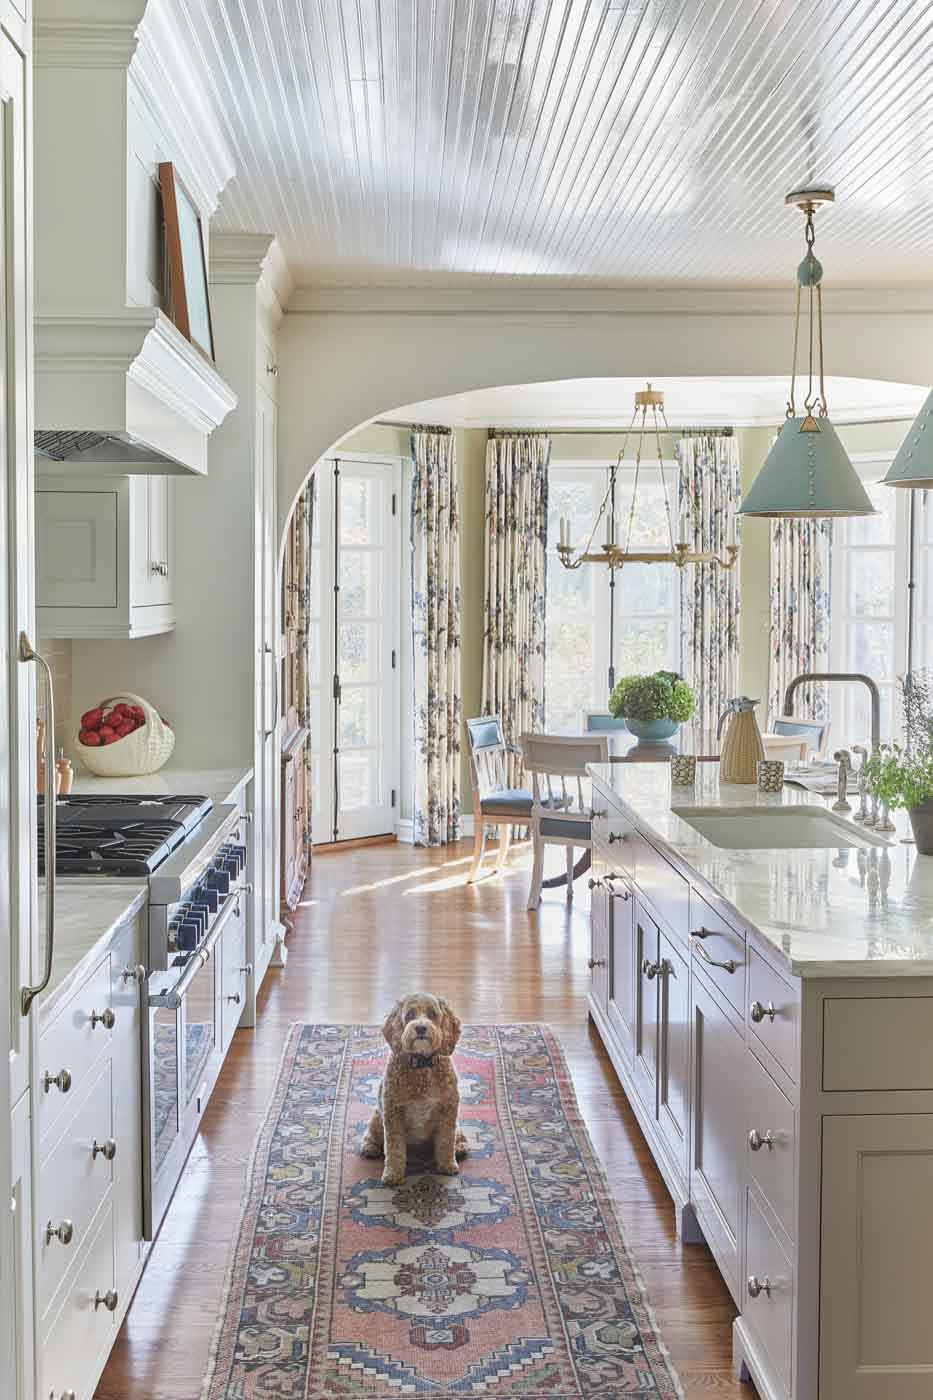 36 1 Kitchen With Dog Designed By Cynthia Lakeforrest Photography By Heather Talbert